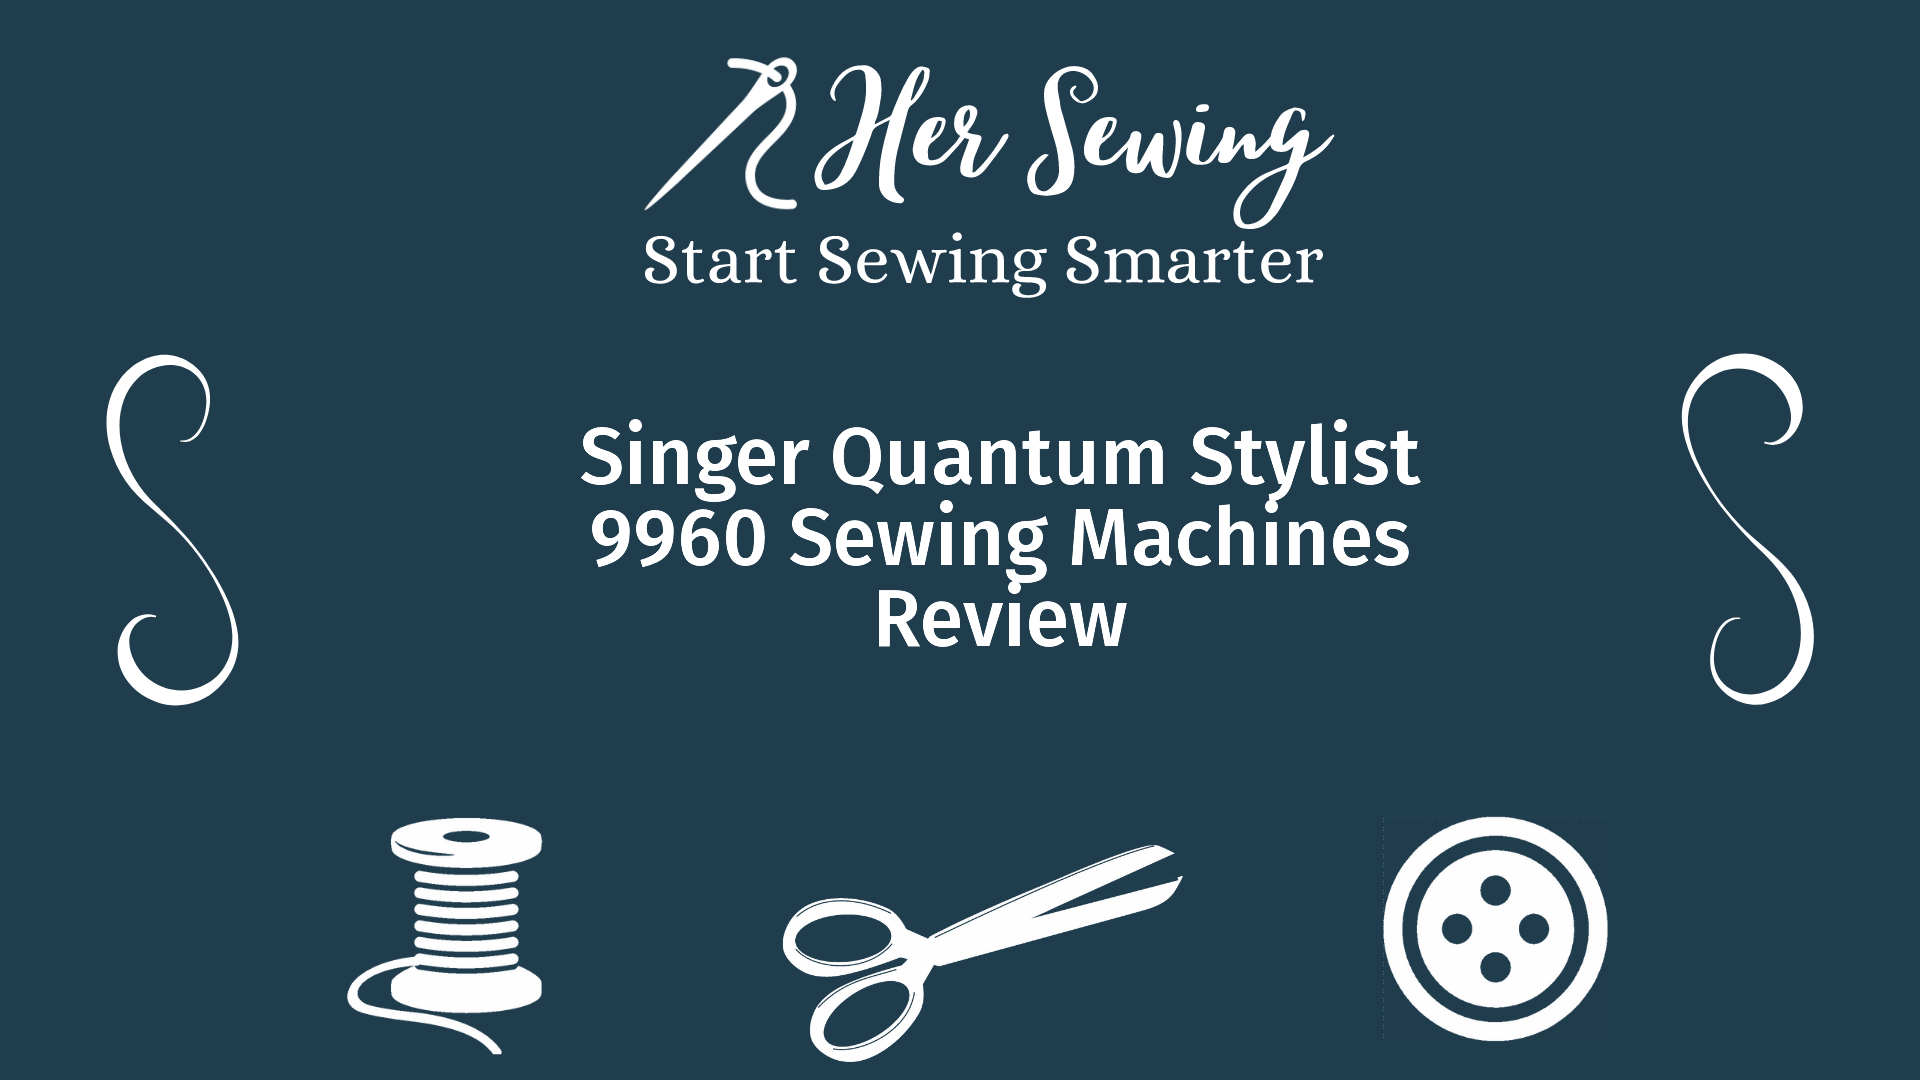 Singer Quantum Stylist 9960 Sewing Machines Review